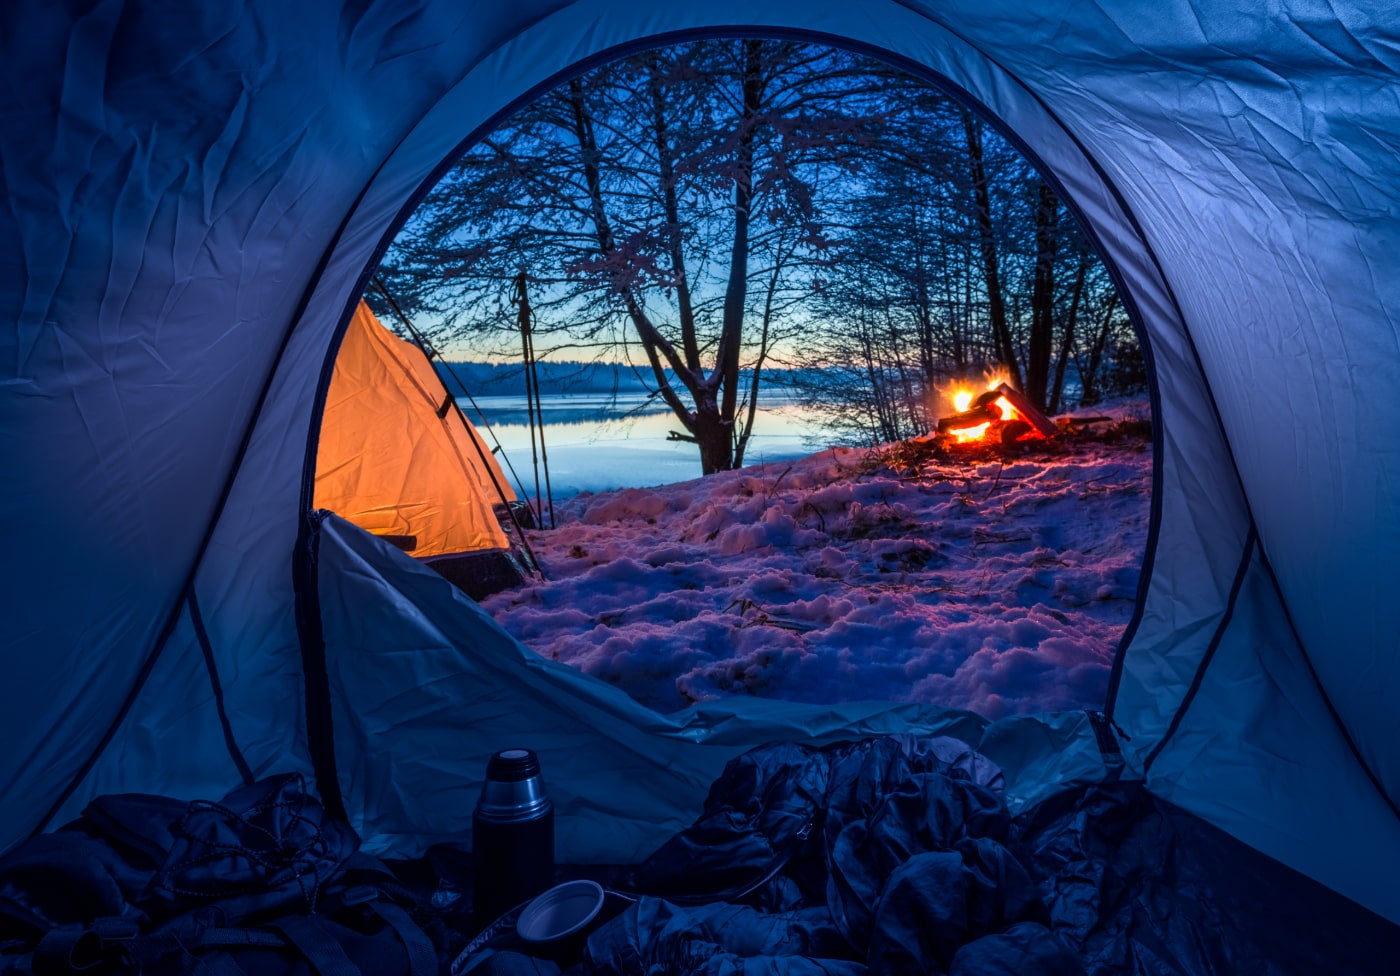 A snowy campsite near a lake with campfire and second tent in the distance as seen from the inside of a tent in the winter